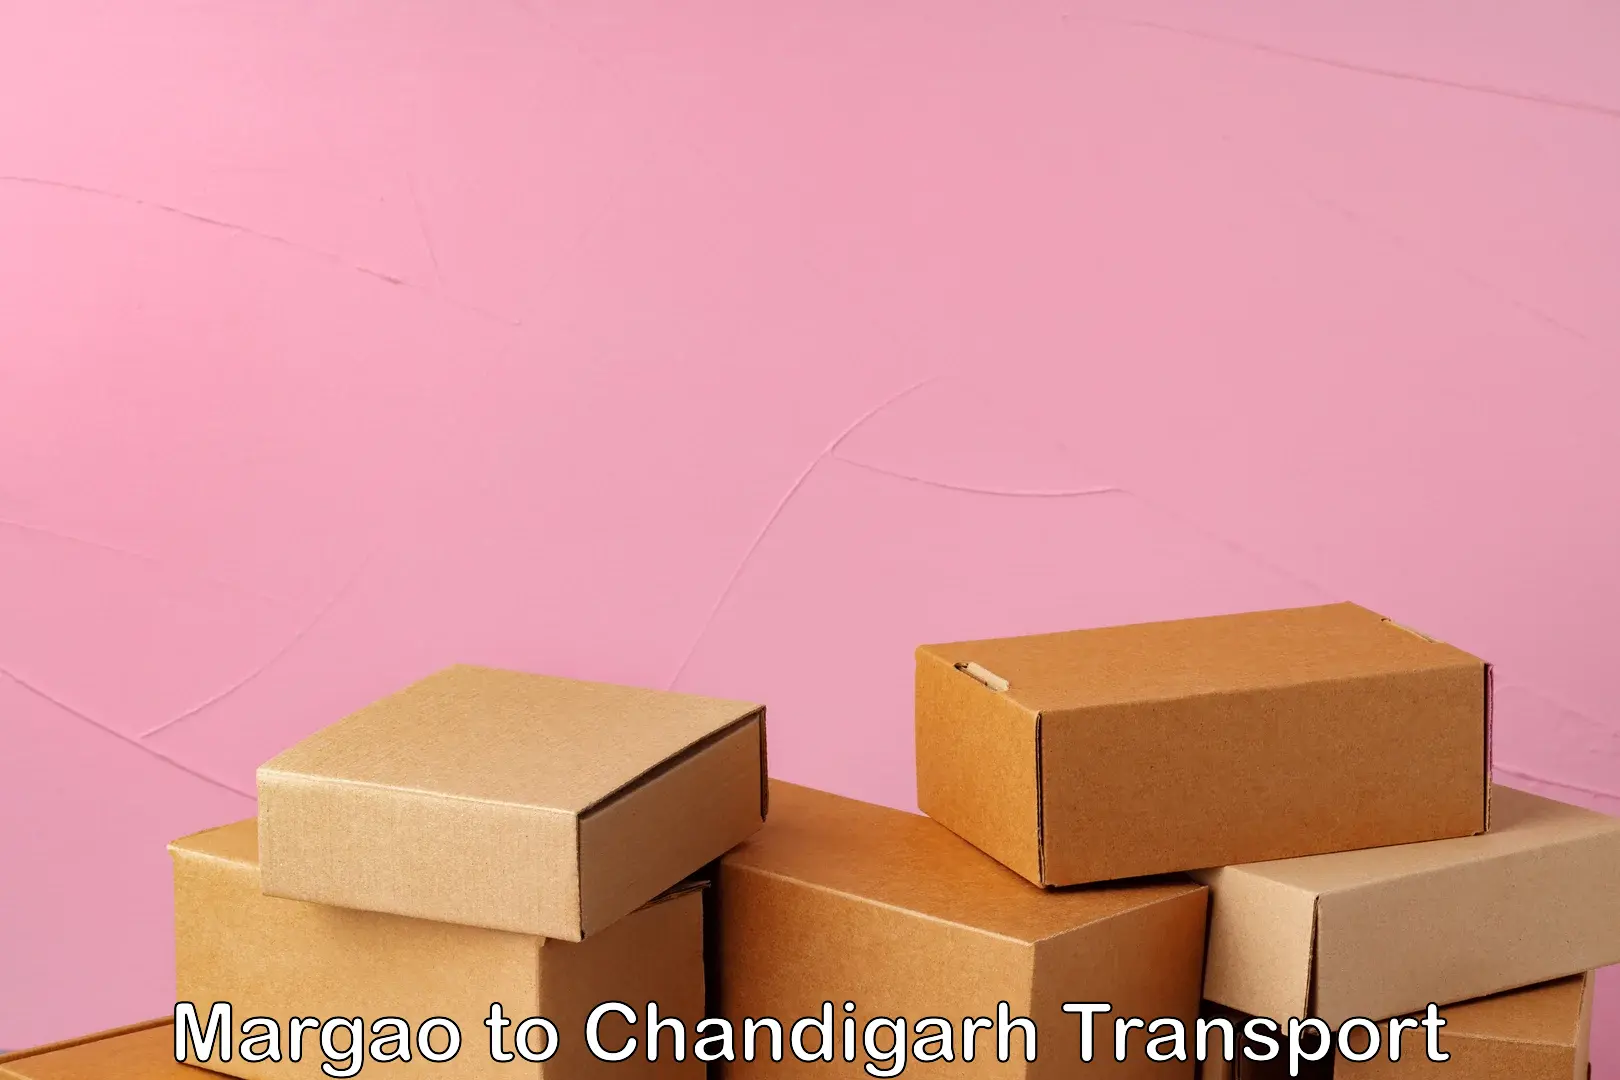 Commercial transport service Margao to Chandigarh